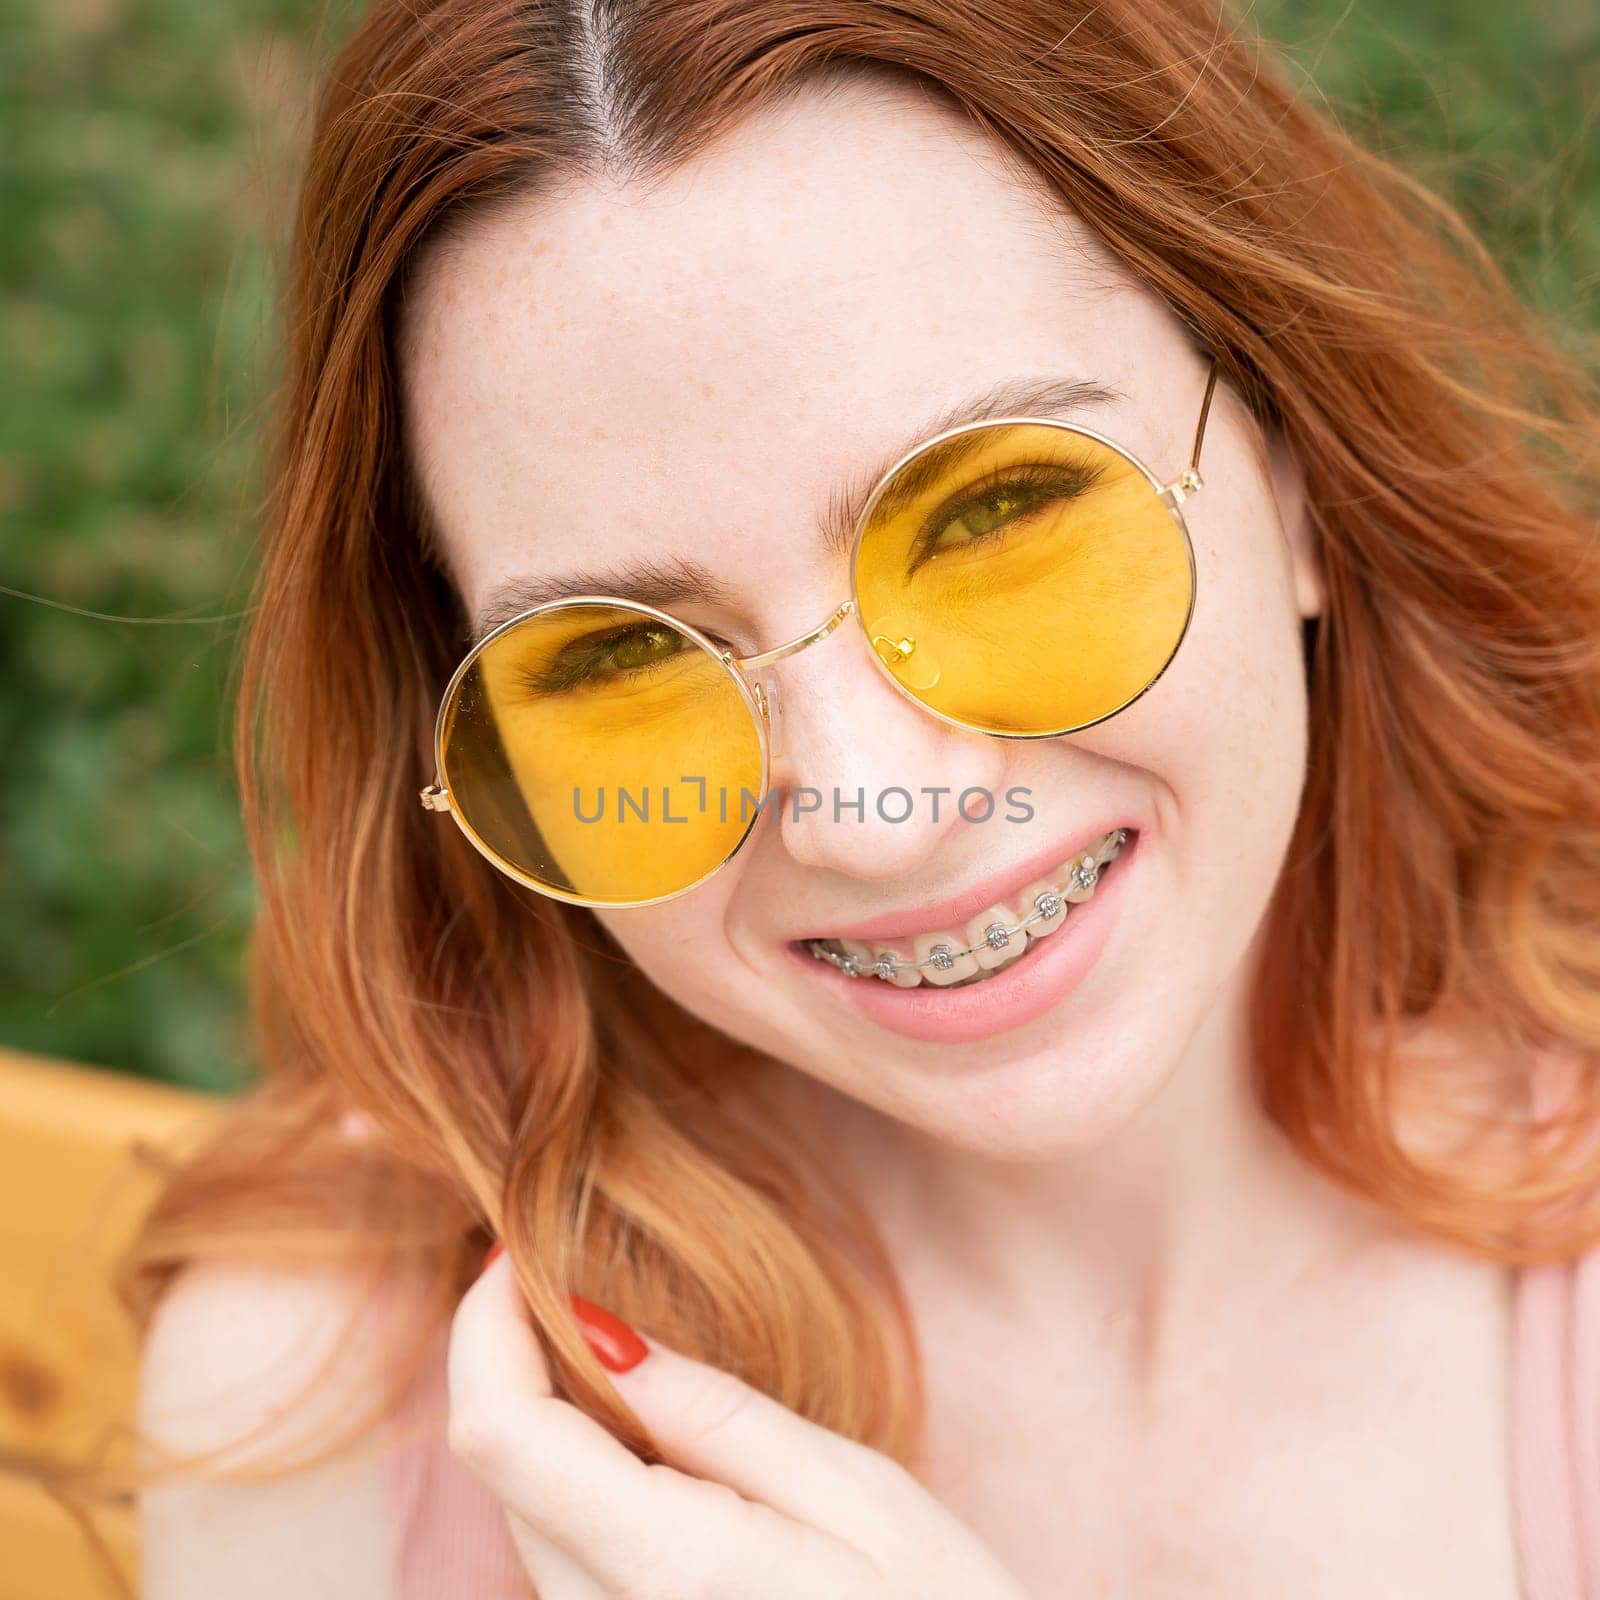 Beautiful young woman in yellow sunglasses smiling showing off braces on her teeth